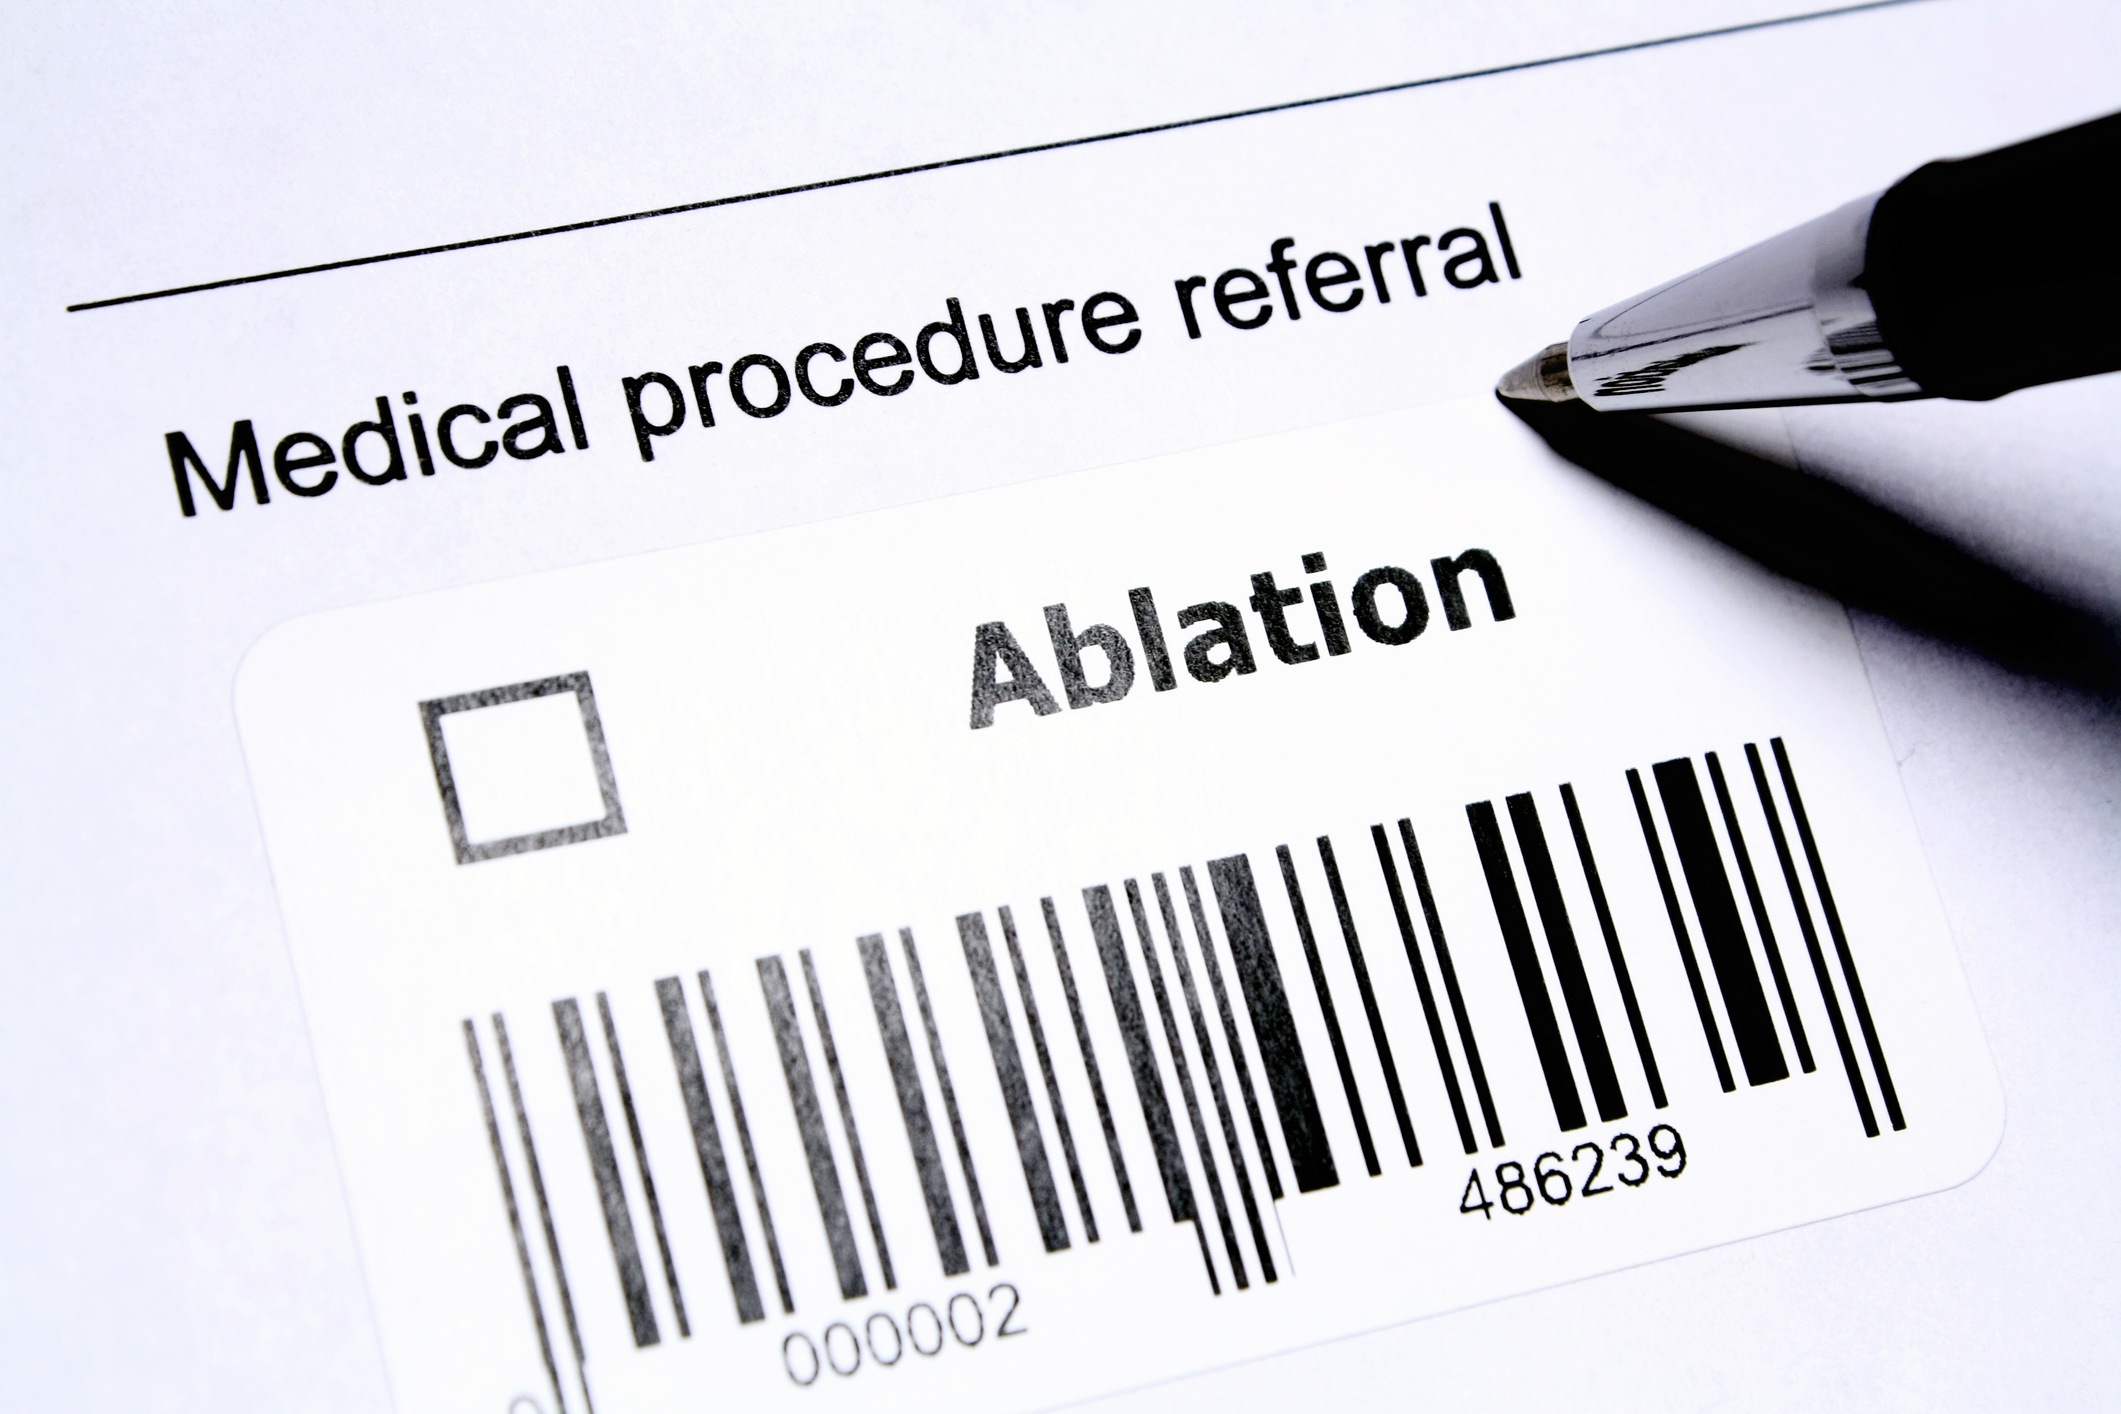 RAFT-AF: No Clear Benefit for Catheter Ablation in HF, but Secondary Outcomes Show Promise